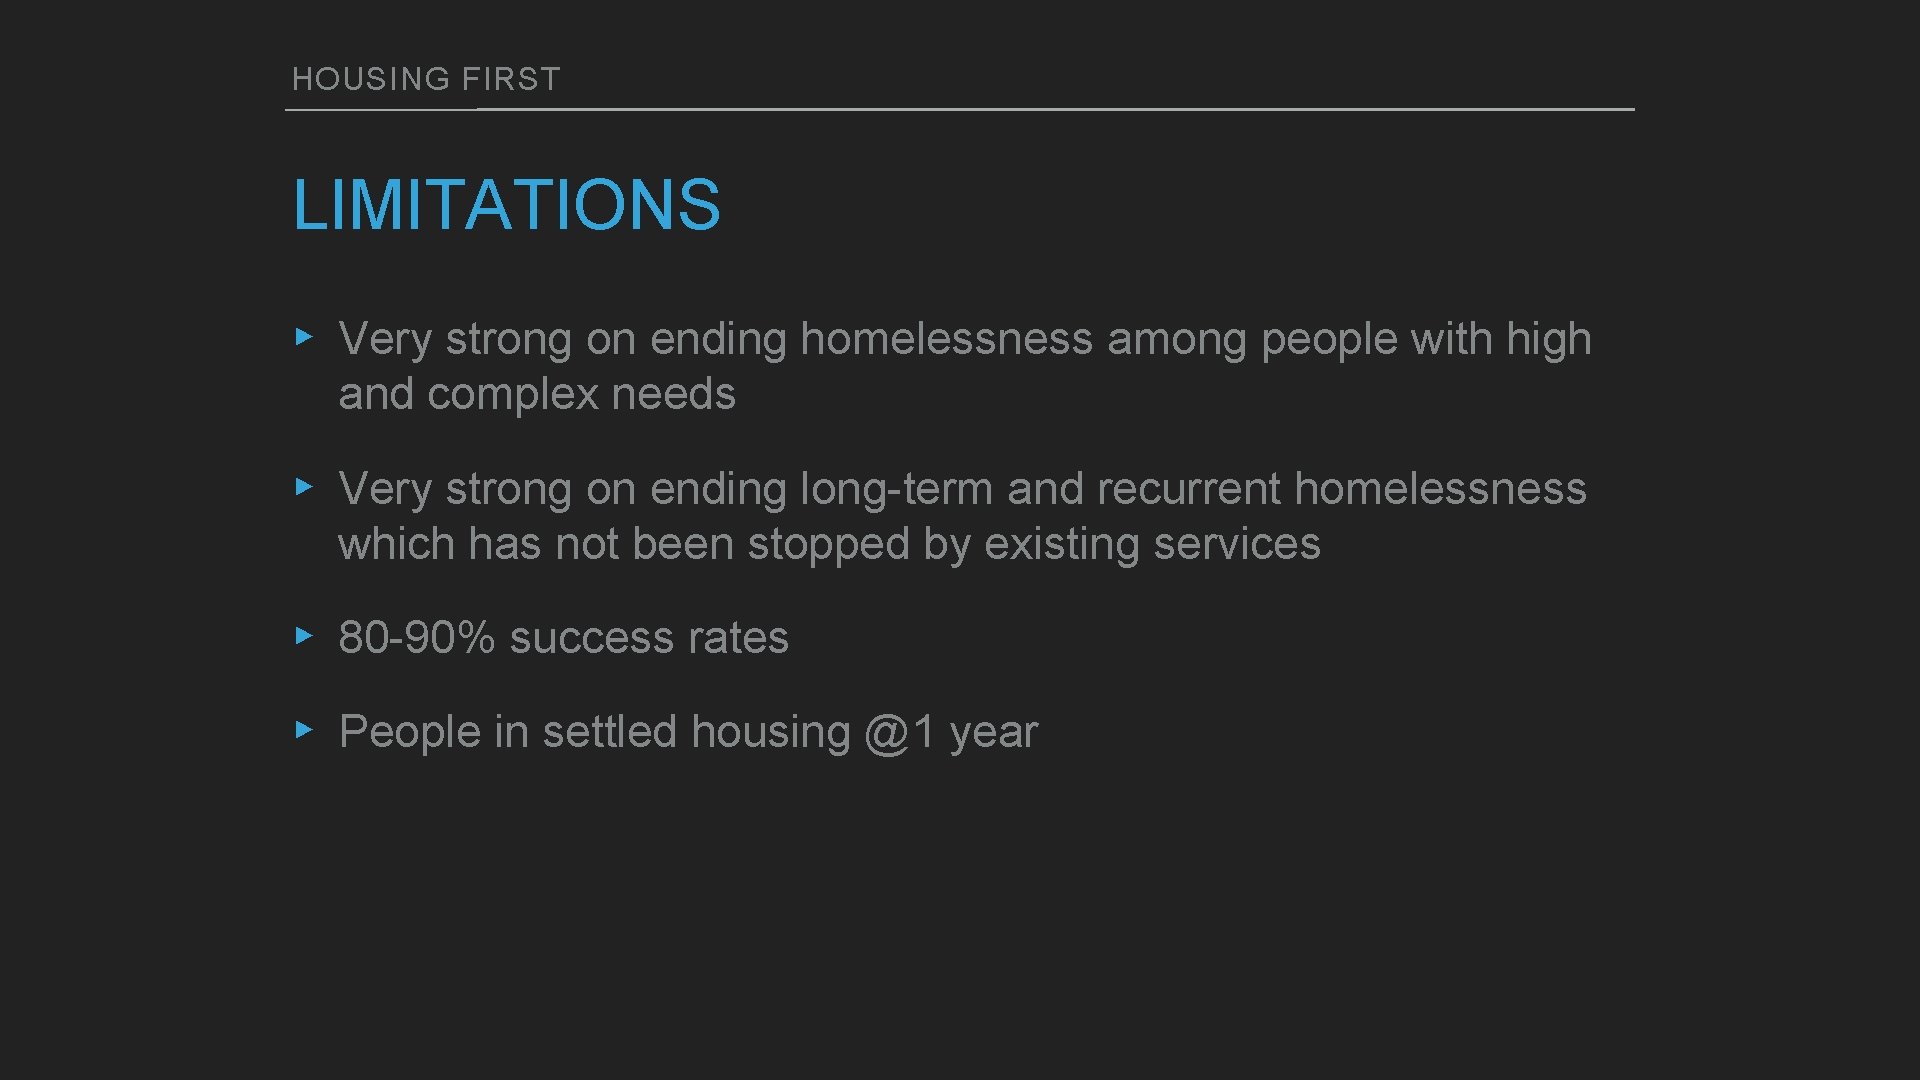 HOUSING FIRST LIMITATIONS ▸ Very strong on ending homelessness among people with high and